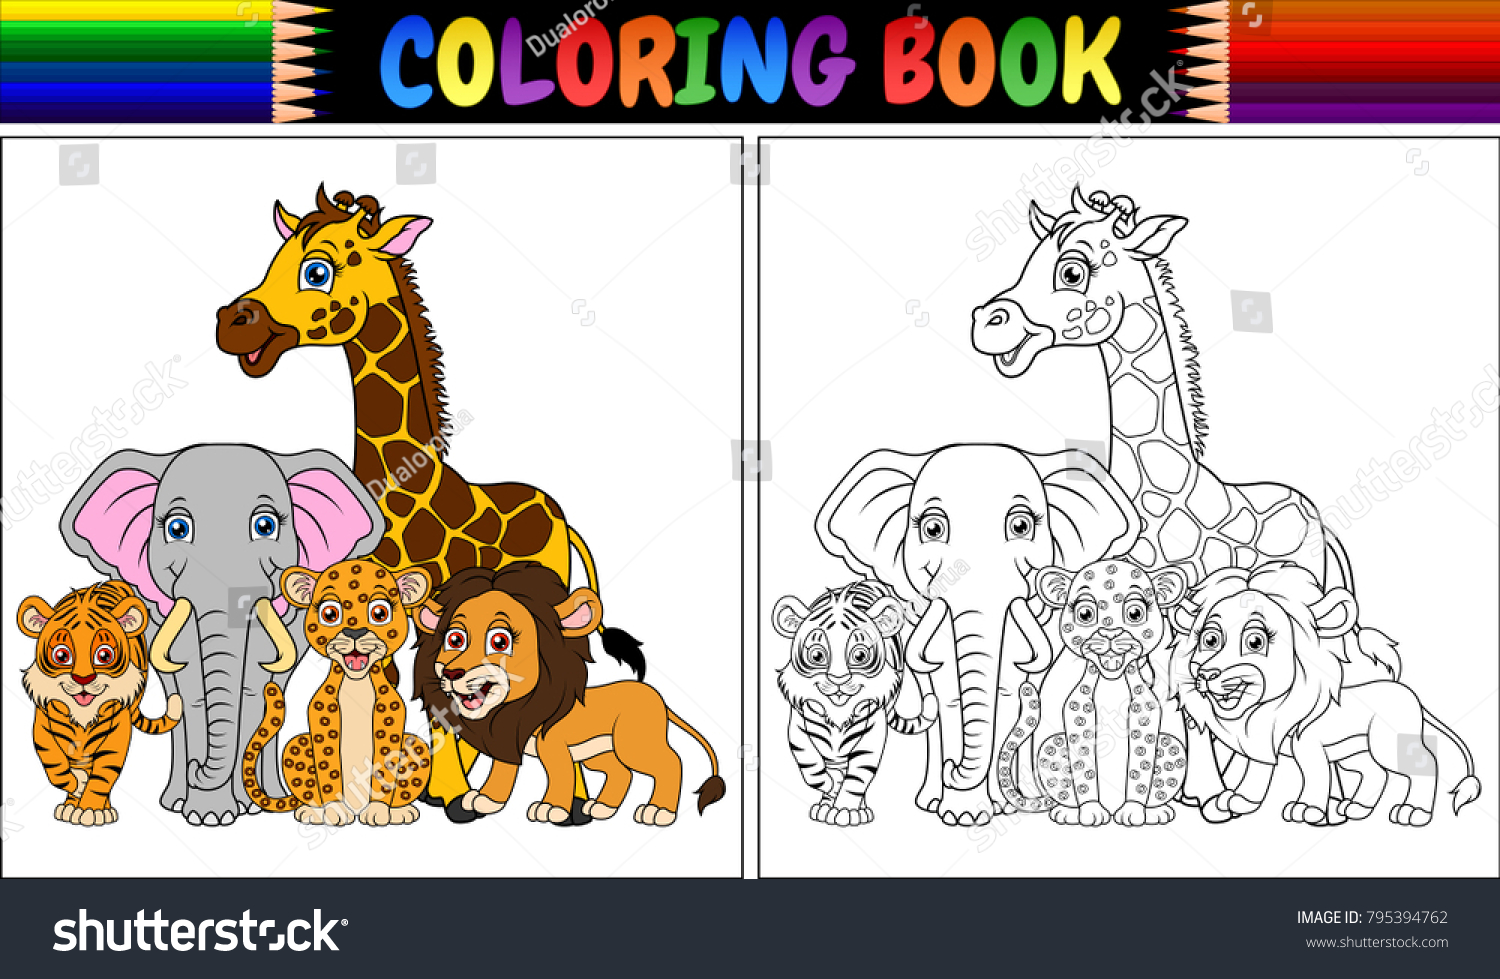 Download Coloring Book Cute African Animals Stock Vector Royalty Free 795394762